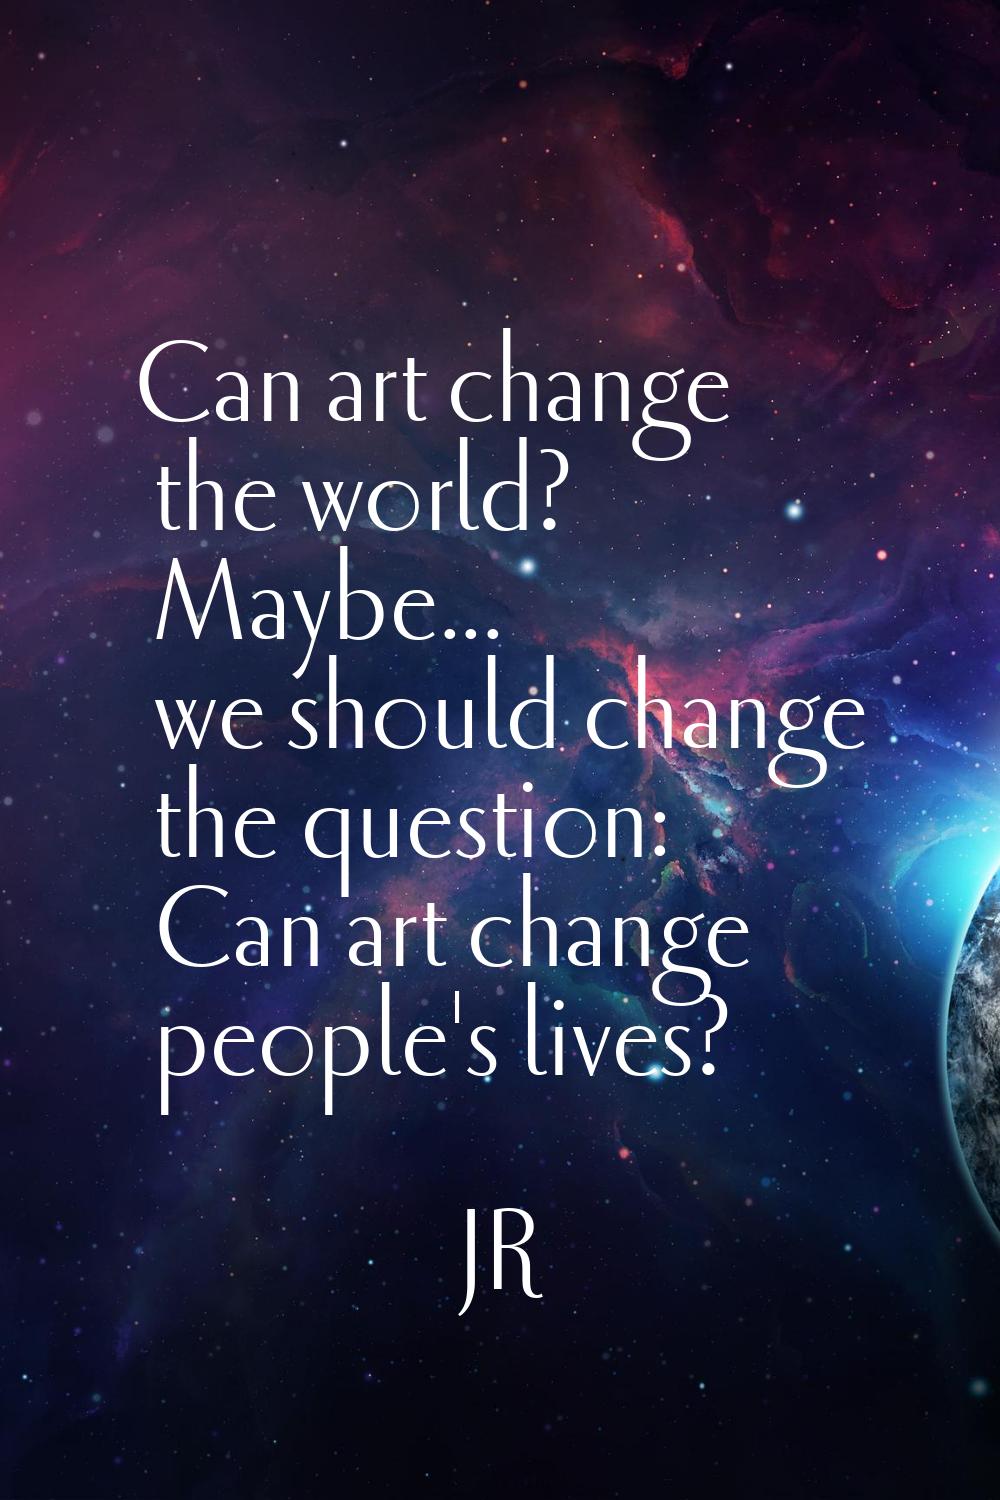 Can art change the world? Maybe... we should change the question: Can art change people's lives?